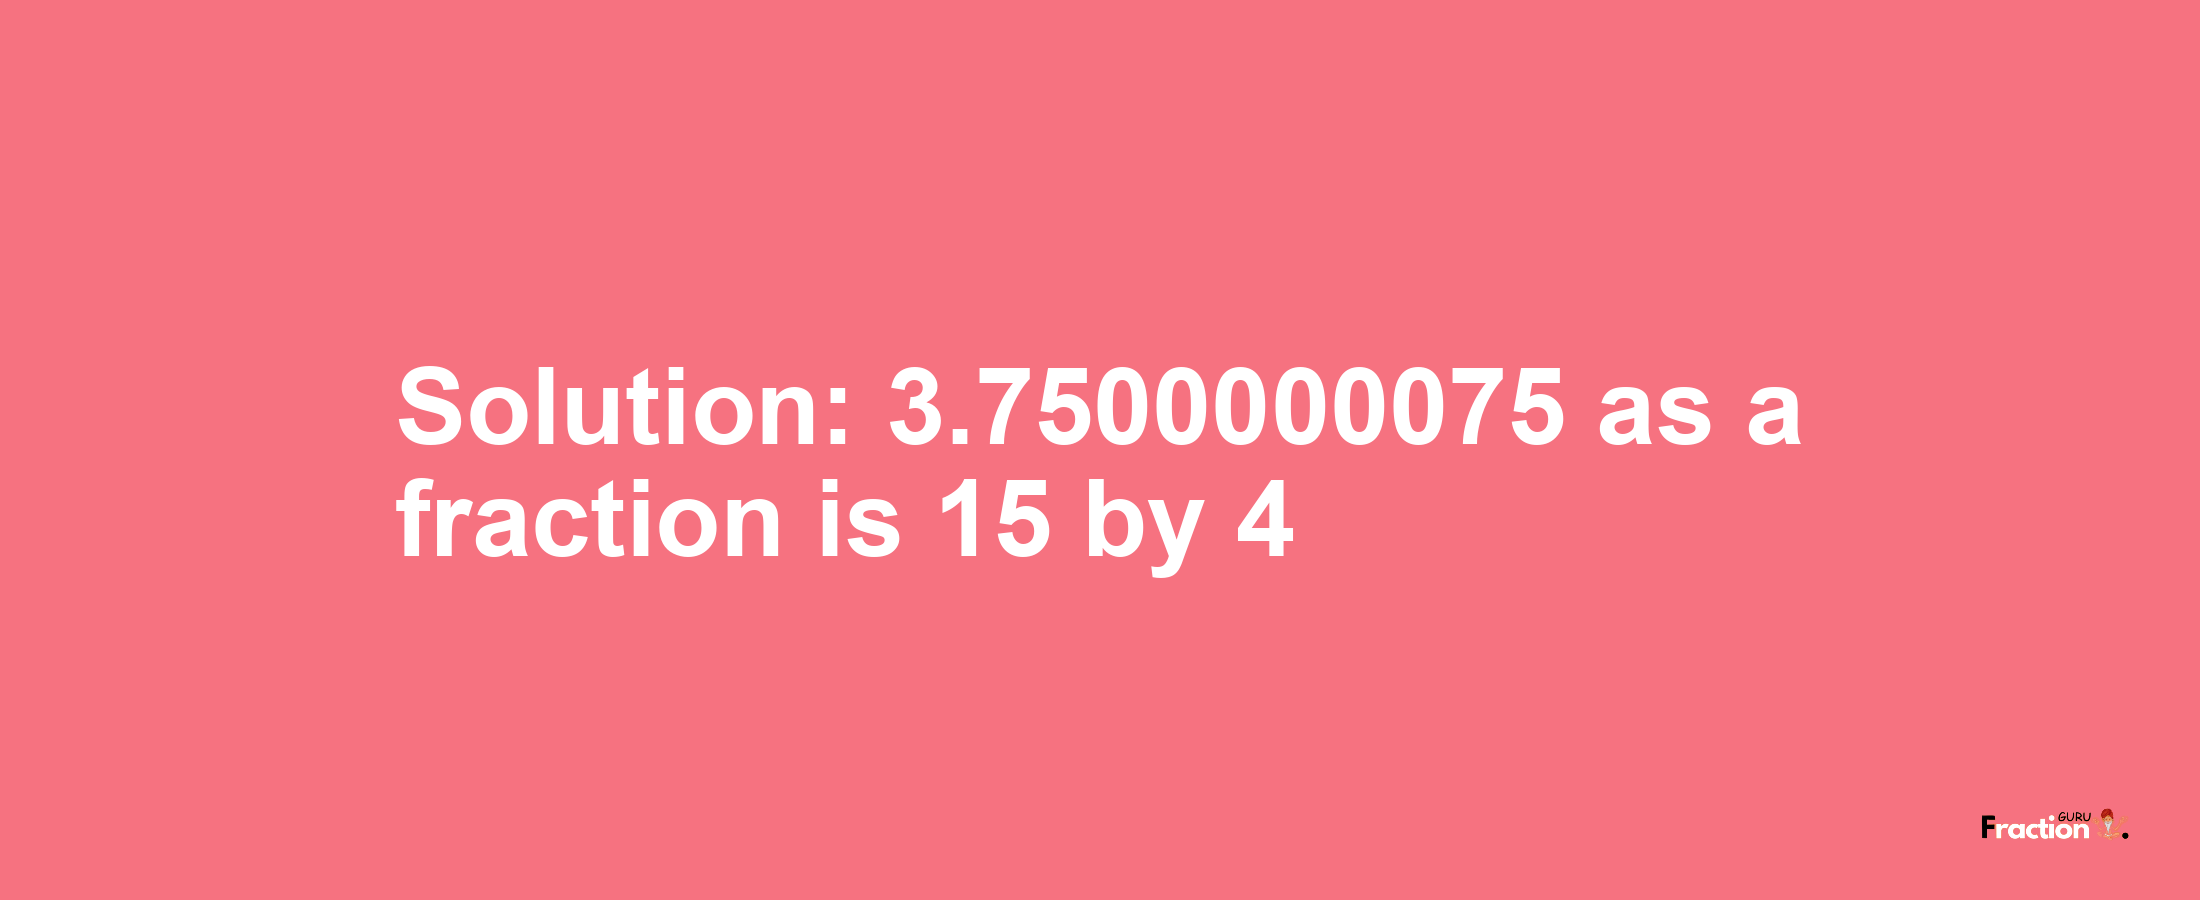 Solution:3.7500000075 as a fraction is 15/4